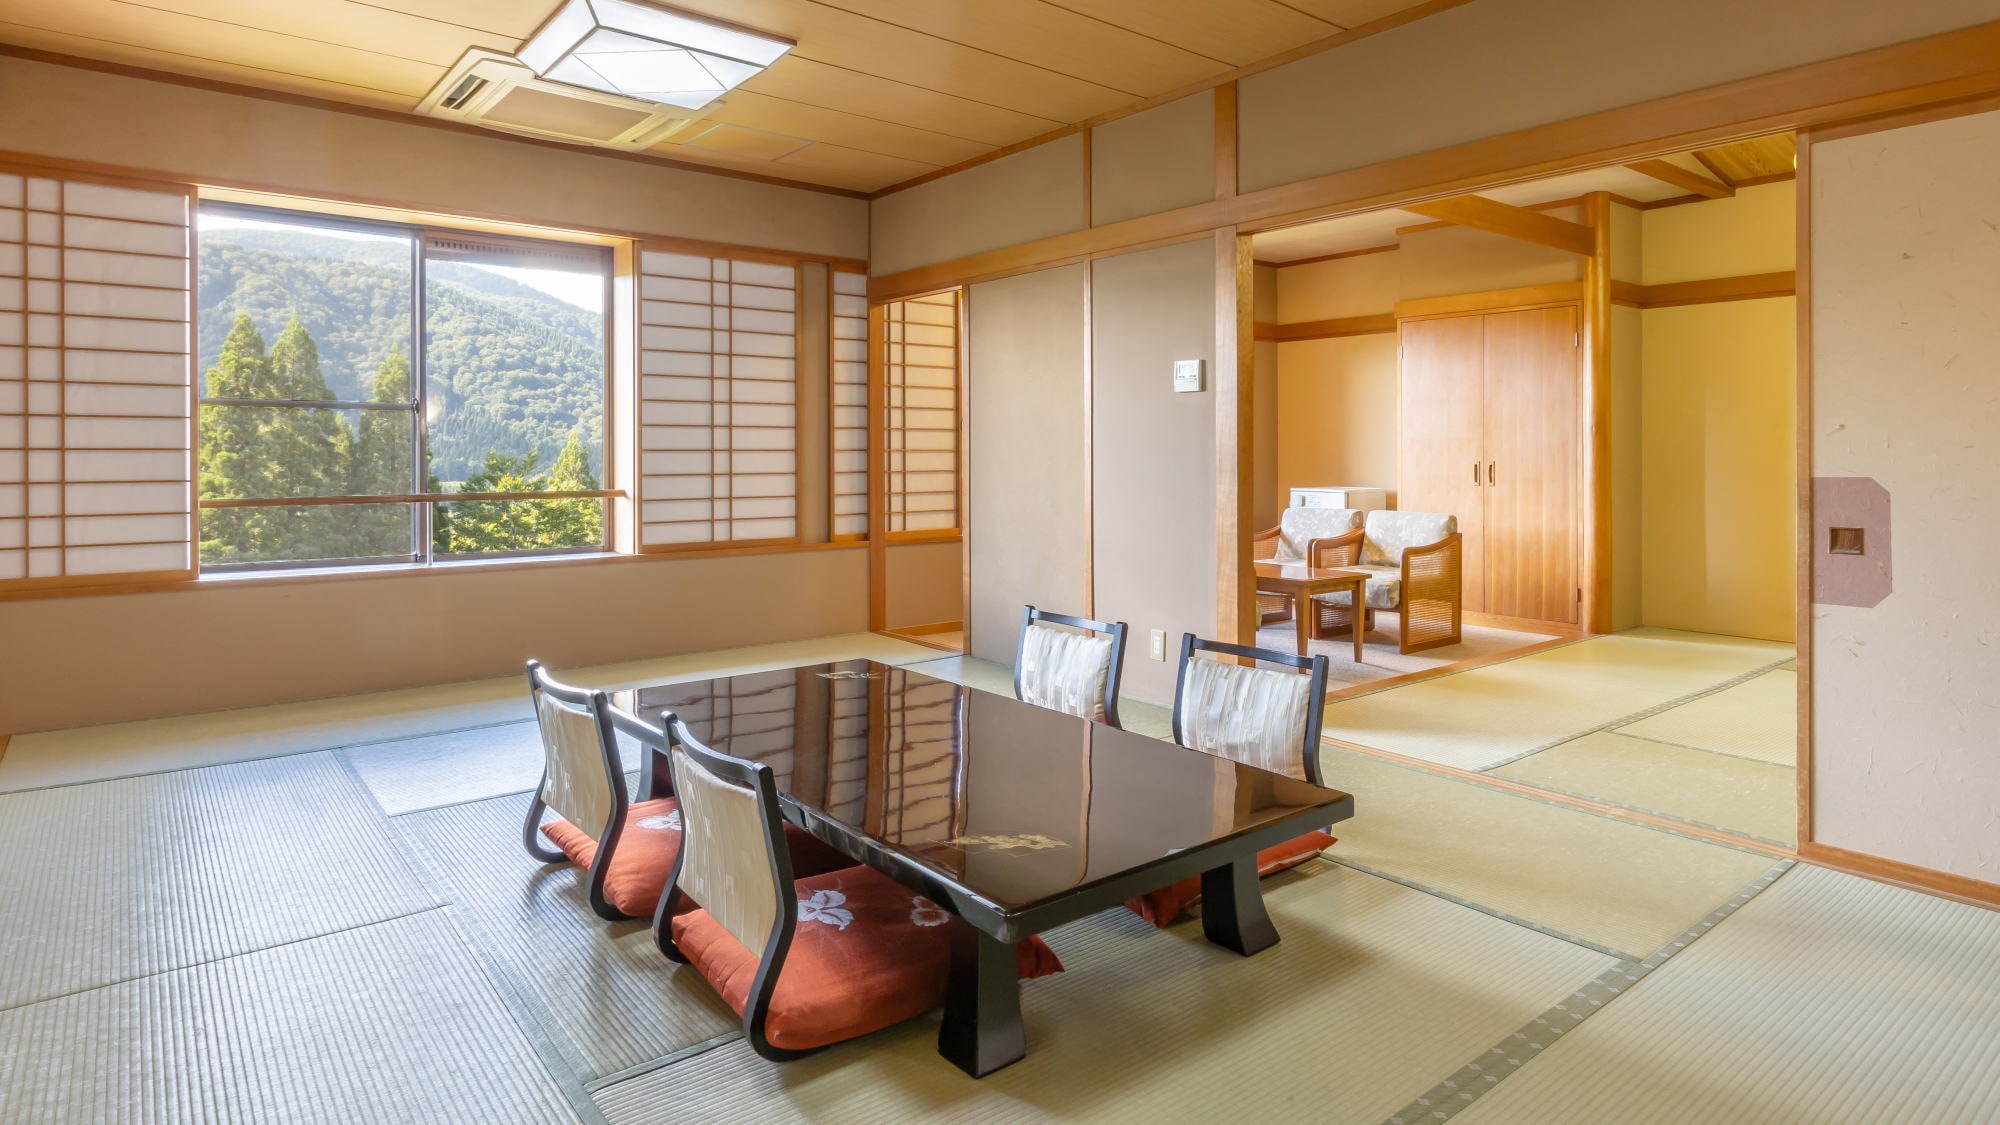 [Main building special room (12 tatami mats + 8 tatami mats + 3 tatami mats)] This is a pure Japanese-style special Japanese room with a size of 66.3 m2 and located on the 5th floor, the top floor of the main building.